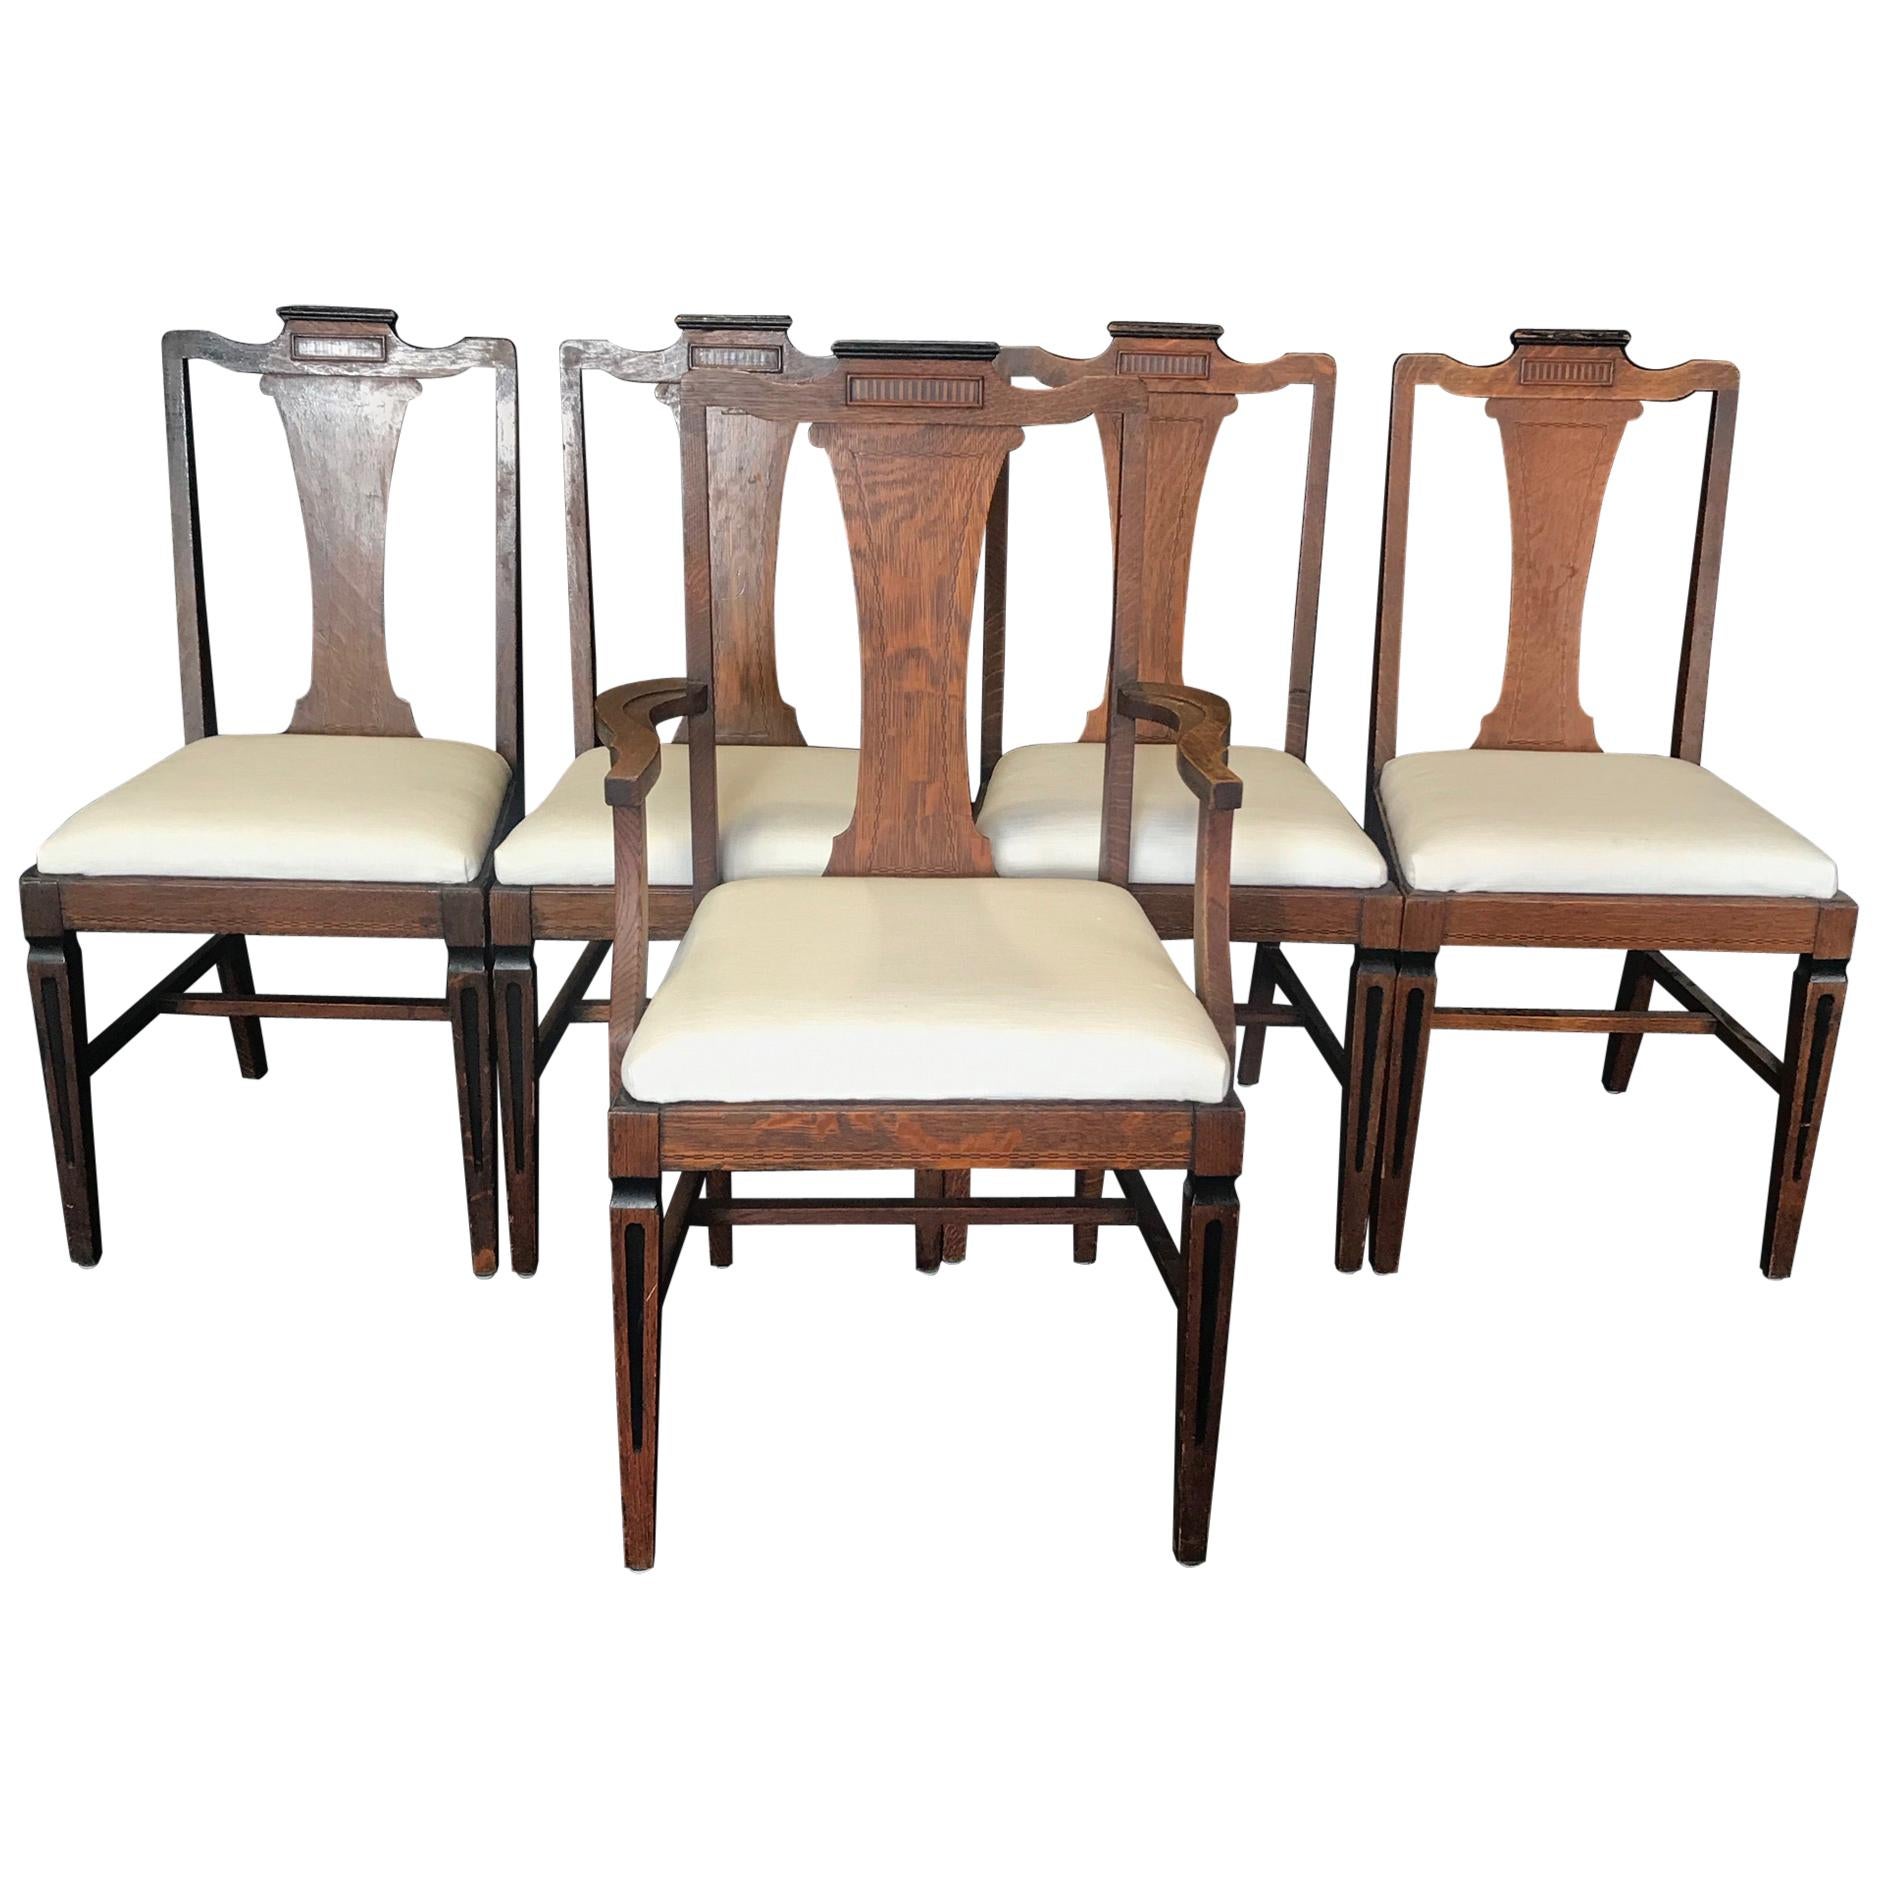 Set of Five Louis XVI Style Oak Dining Chairs with Inlaid Marquetry